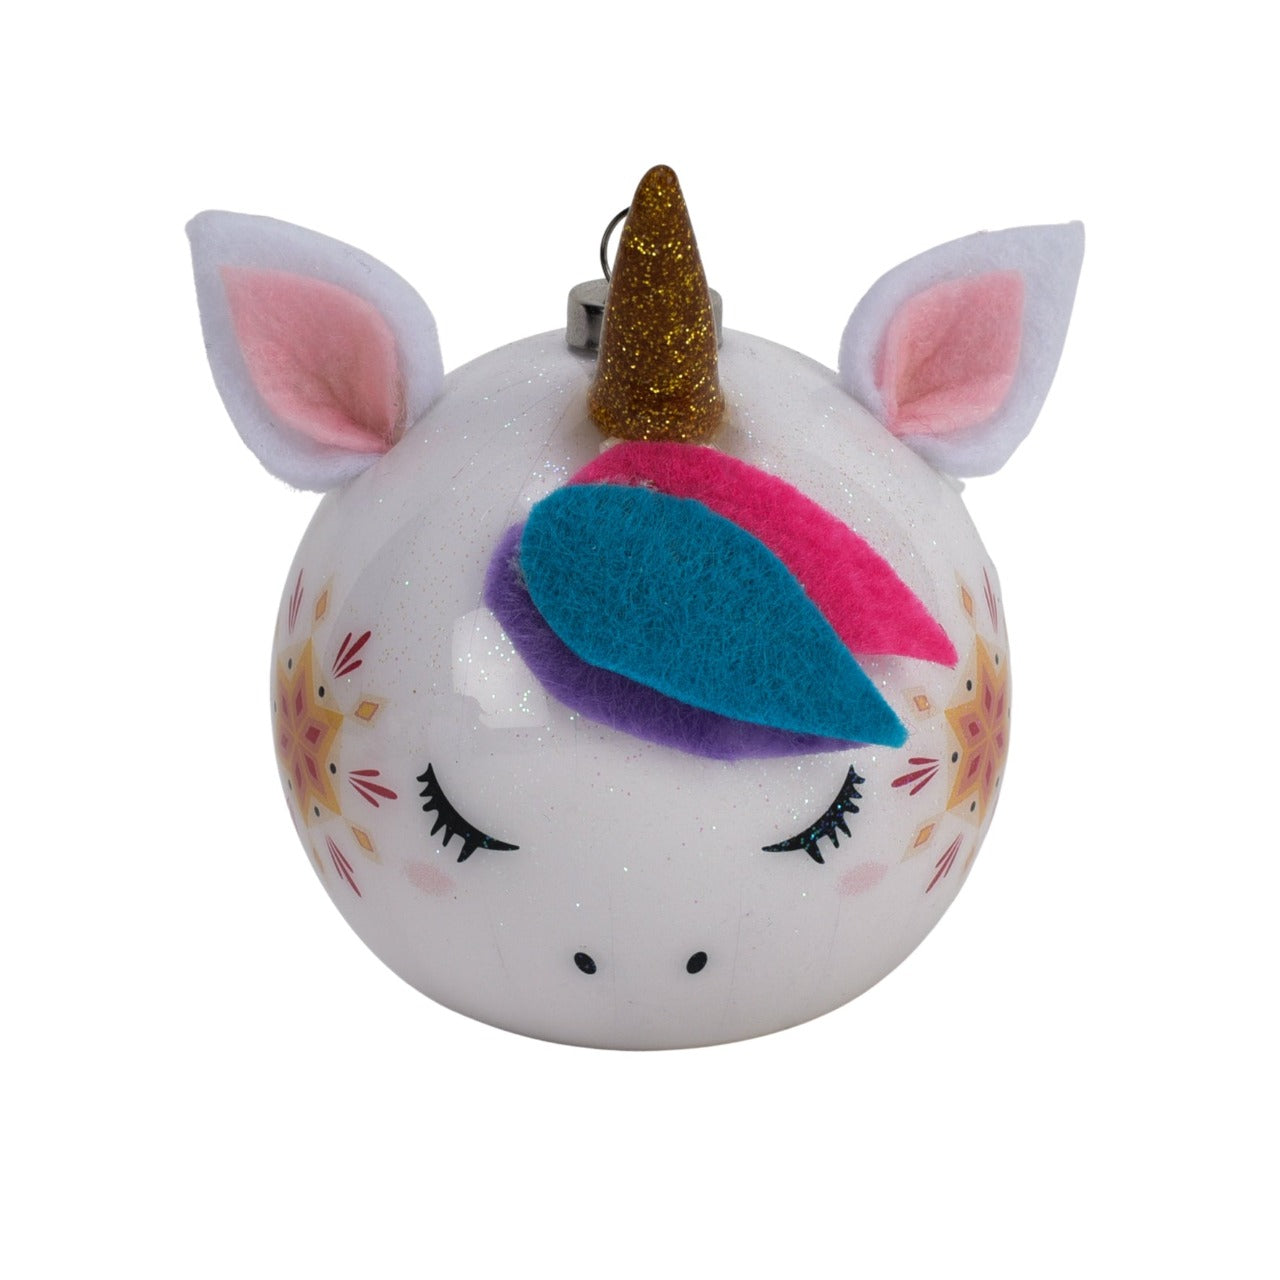 Christmas LED Light Up Unicorn Head Decoration  This fun and quirky Unicorn head decoration would make a cheerful and unique addition to any tree this year. With an LED light up glittery horn, this is certain to brighten up any living space.